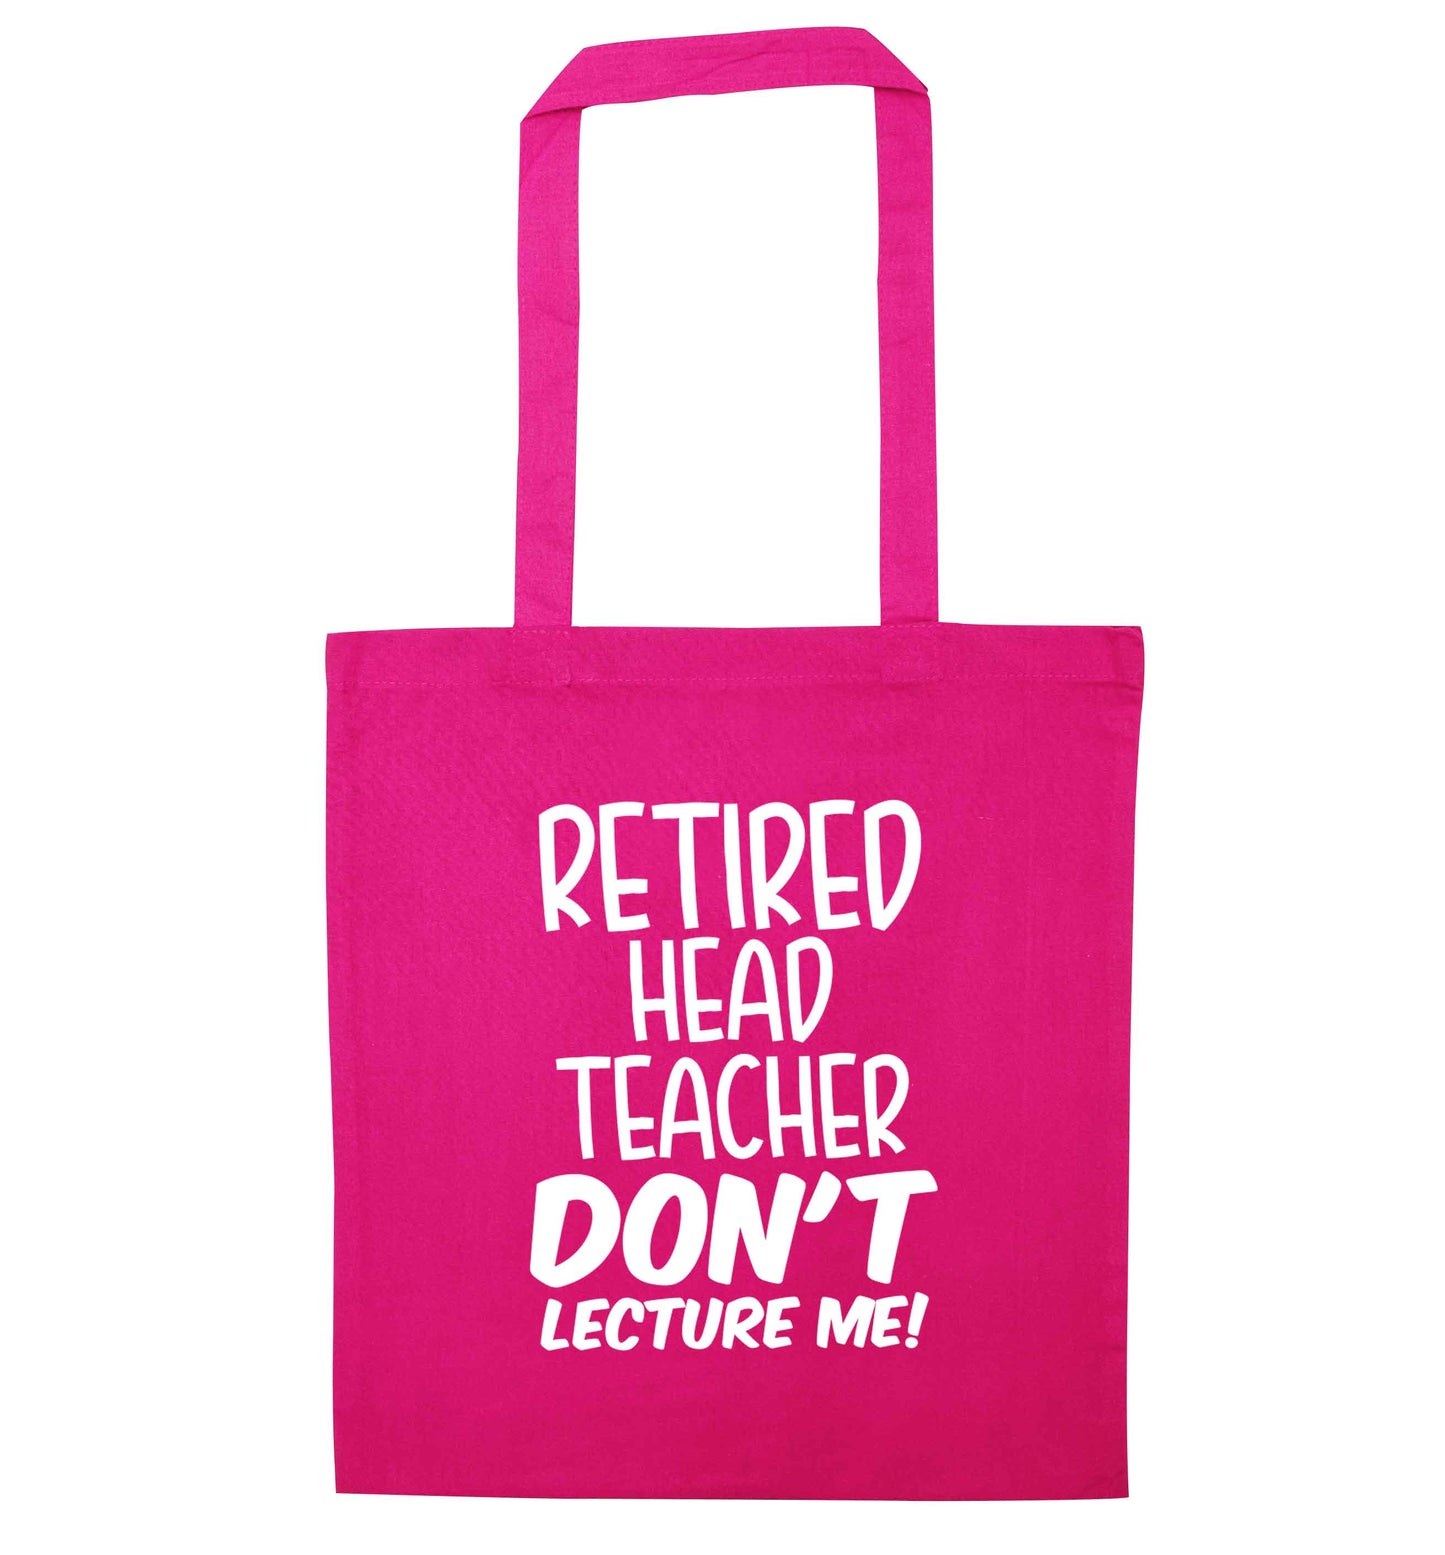 Retired head teacher don't lecture me! pink tote bag